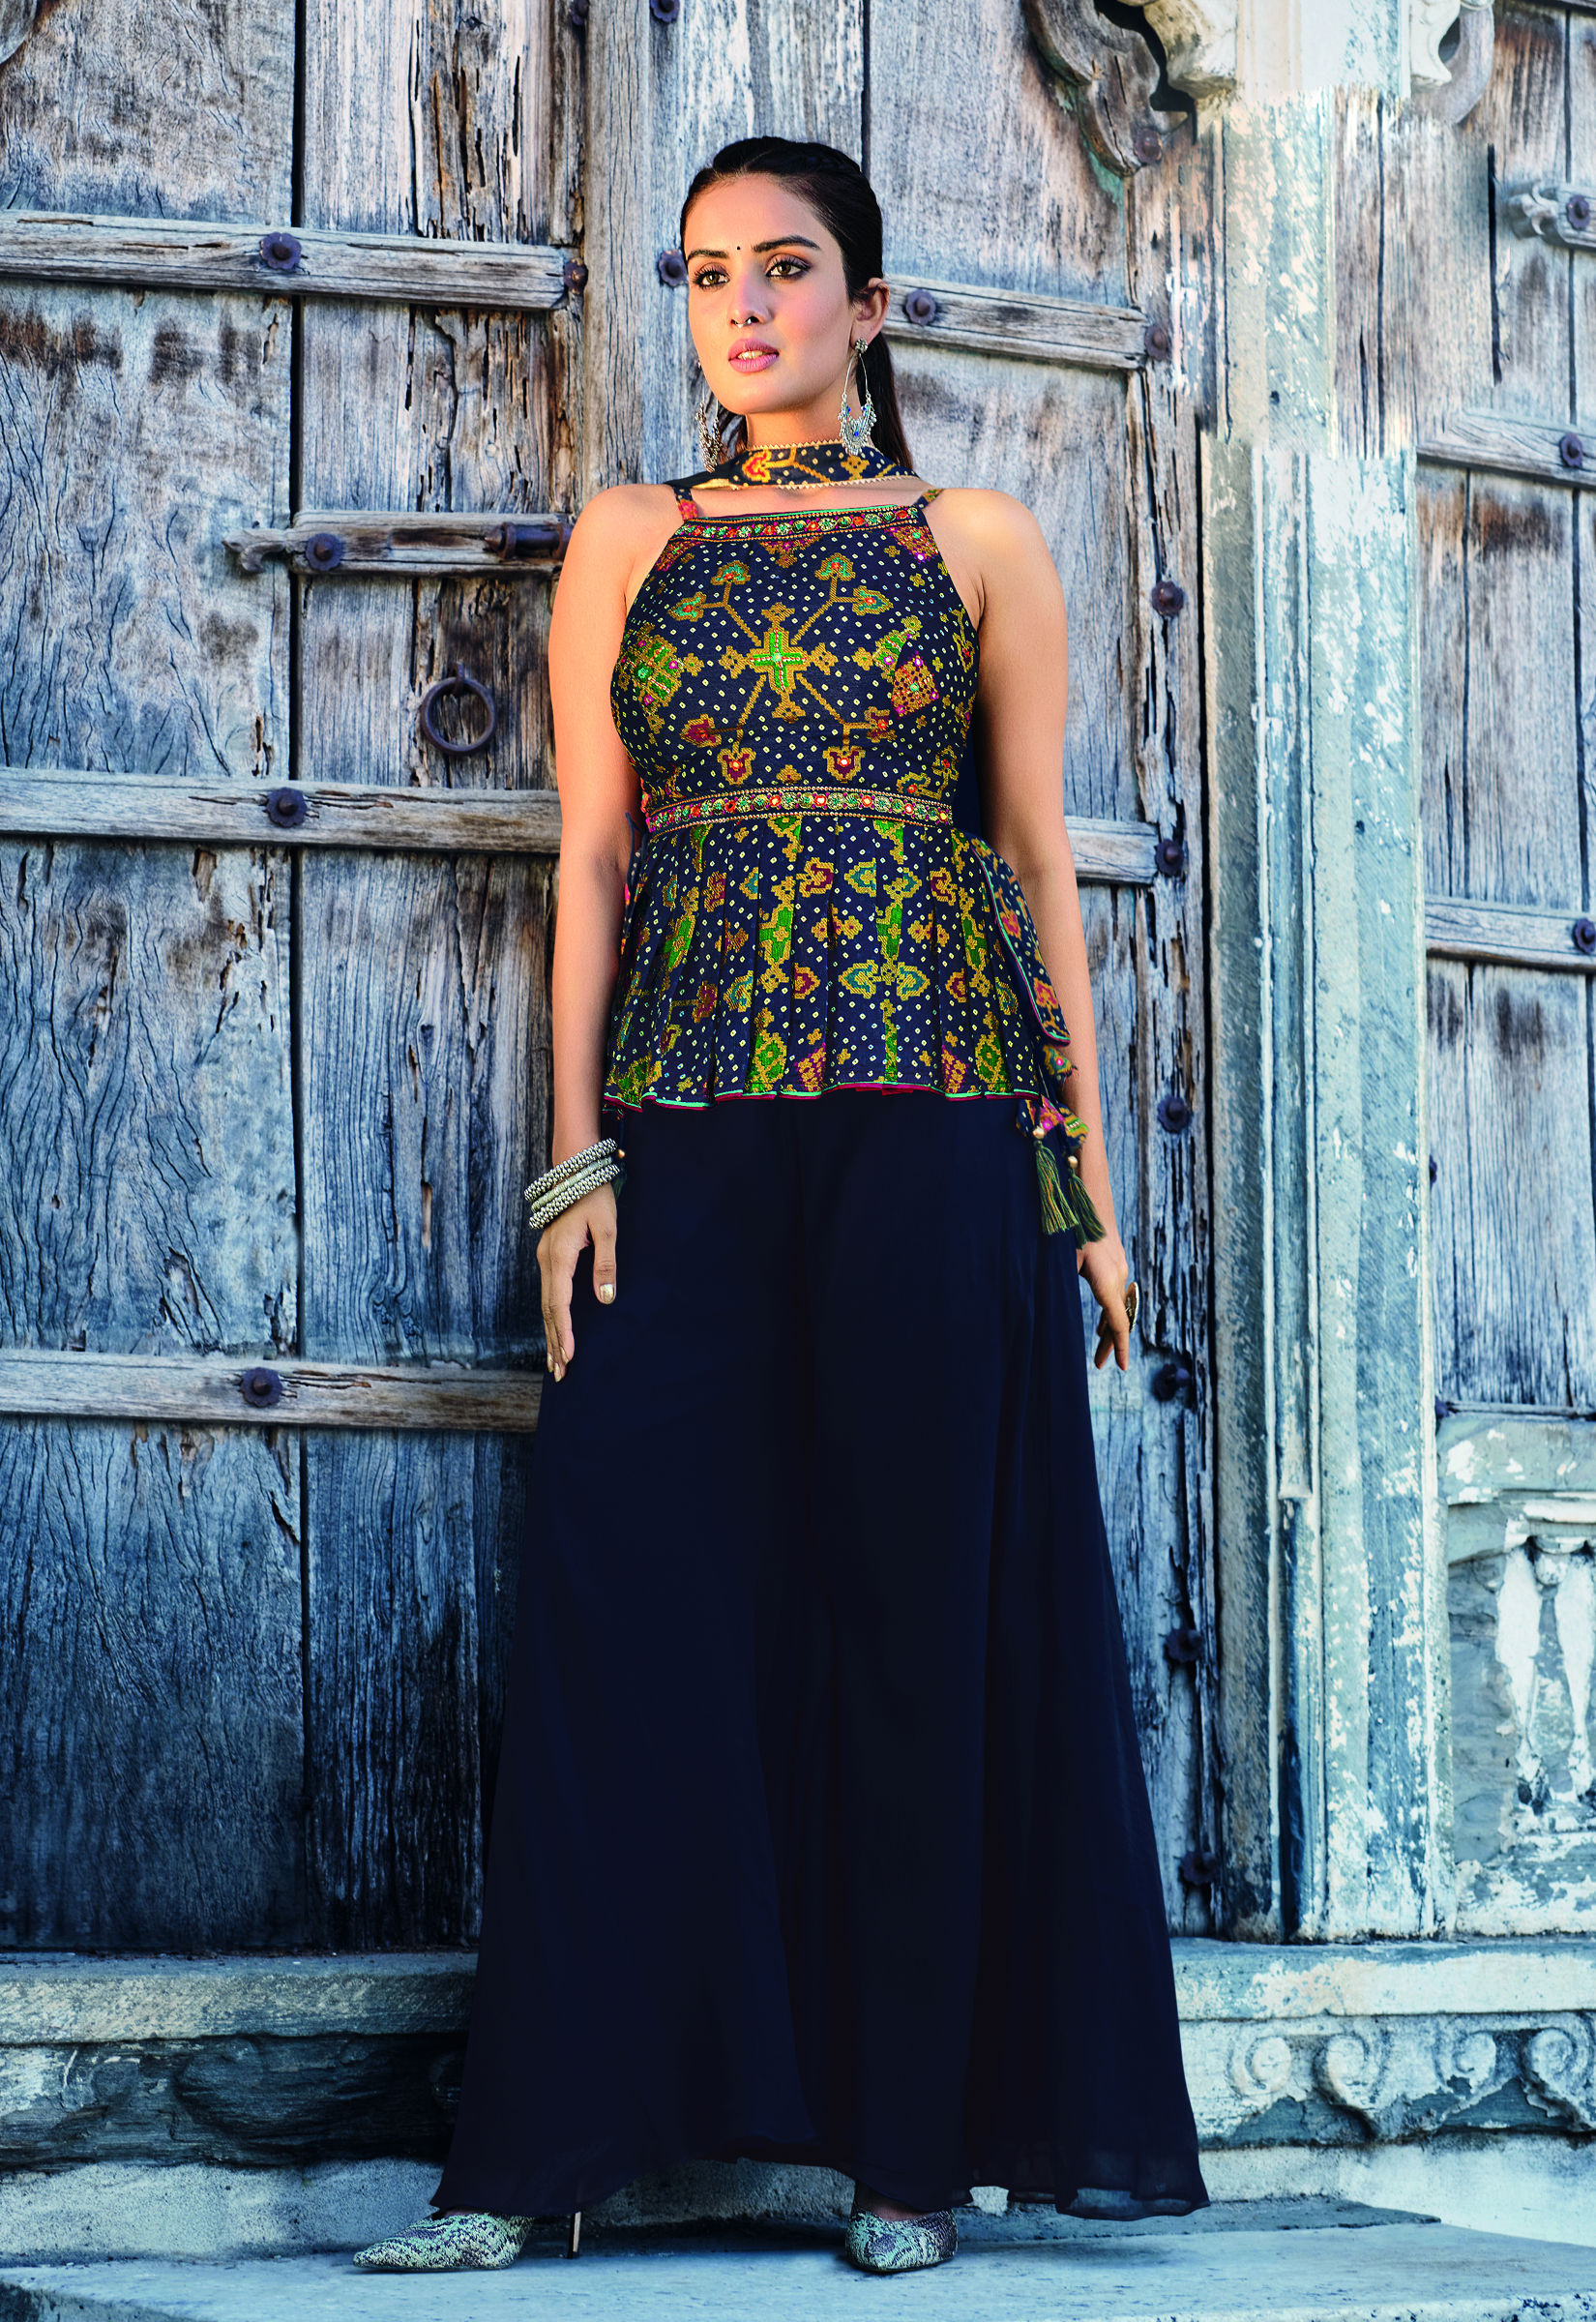 Unique Party Wear Indo Western Dress in Green Colour